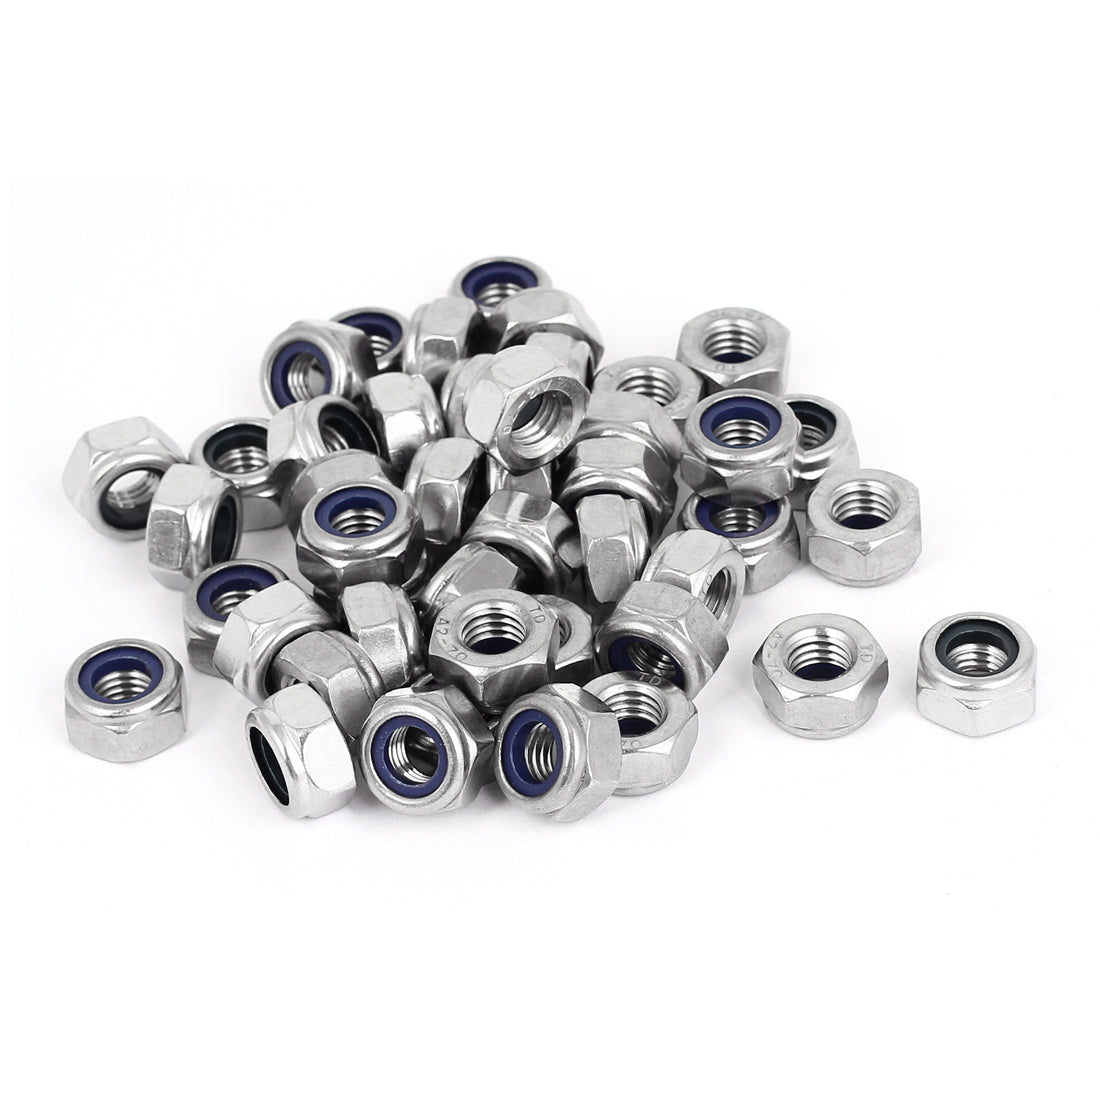 Uxcell Uxcell M10 x 1.5mm Stainless Steel Nylock Self-Locking Nylon Insert Hex Lock Nuts 50pcs